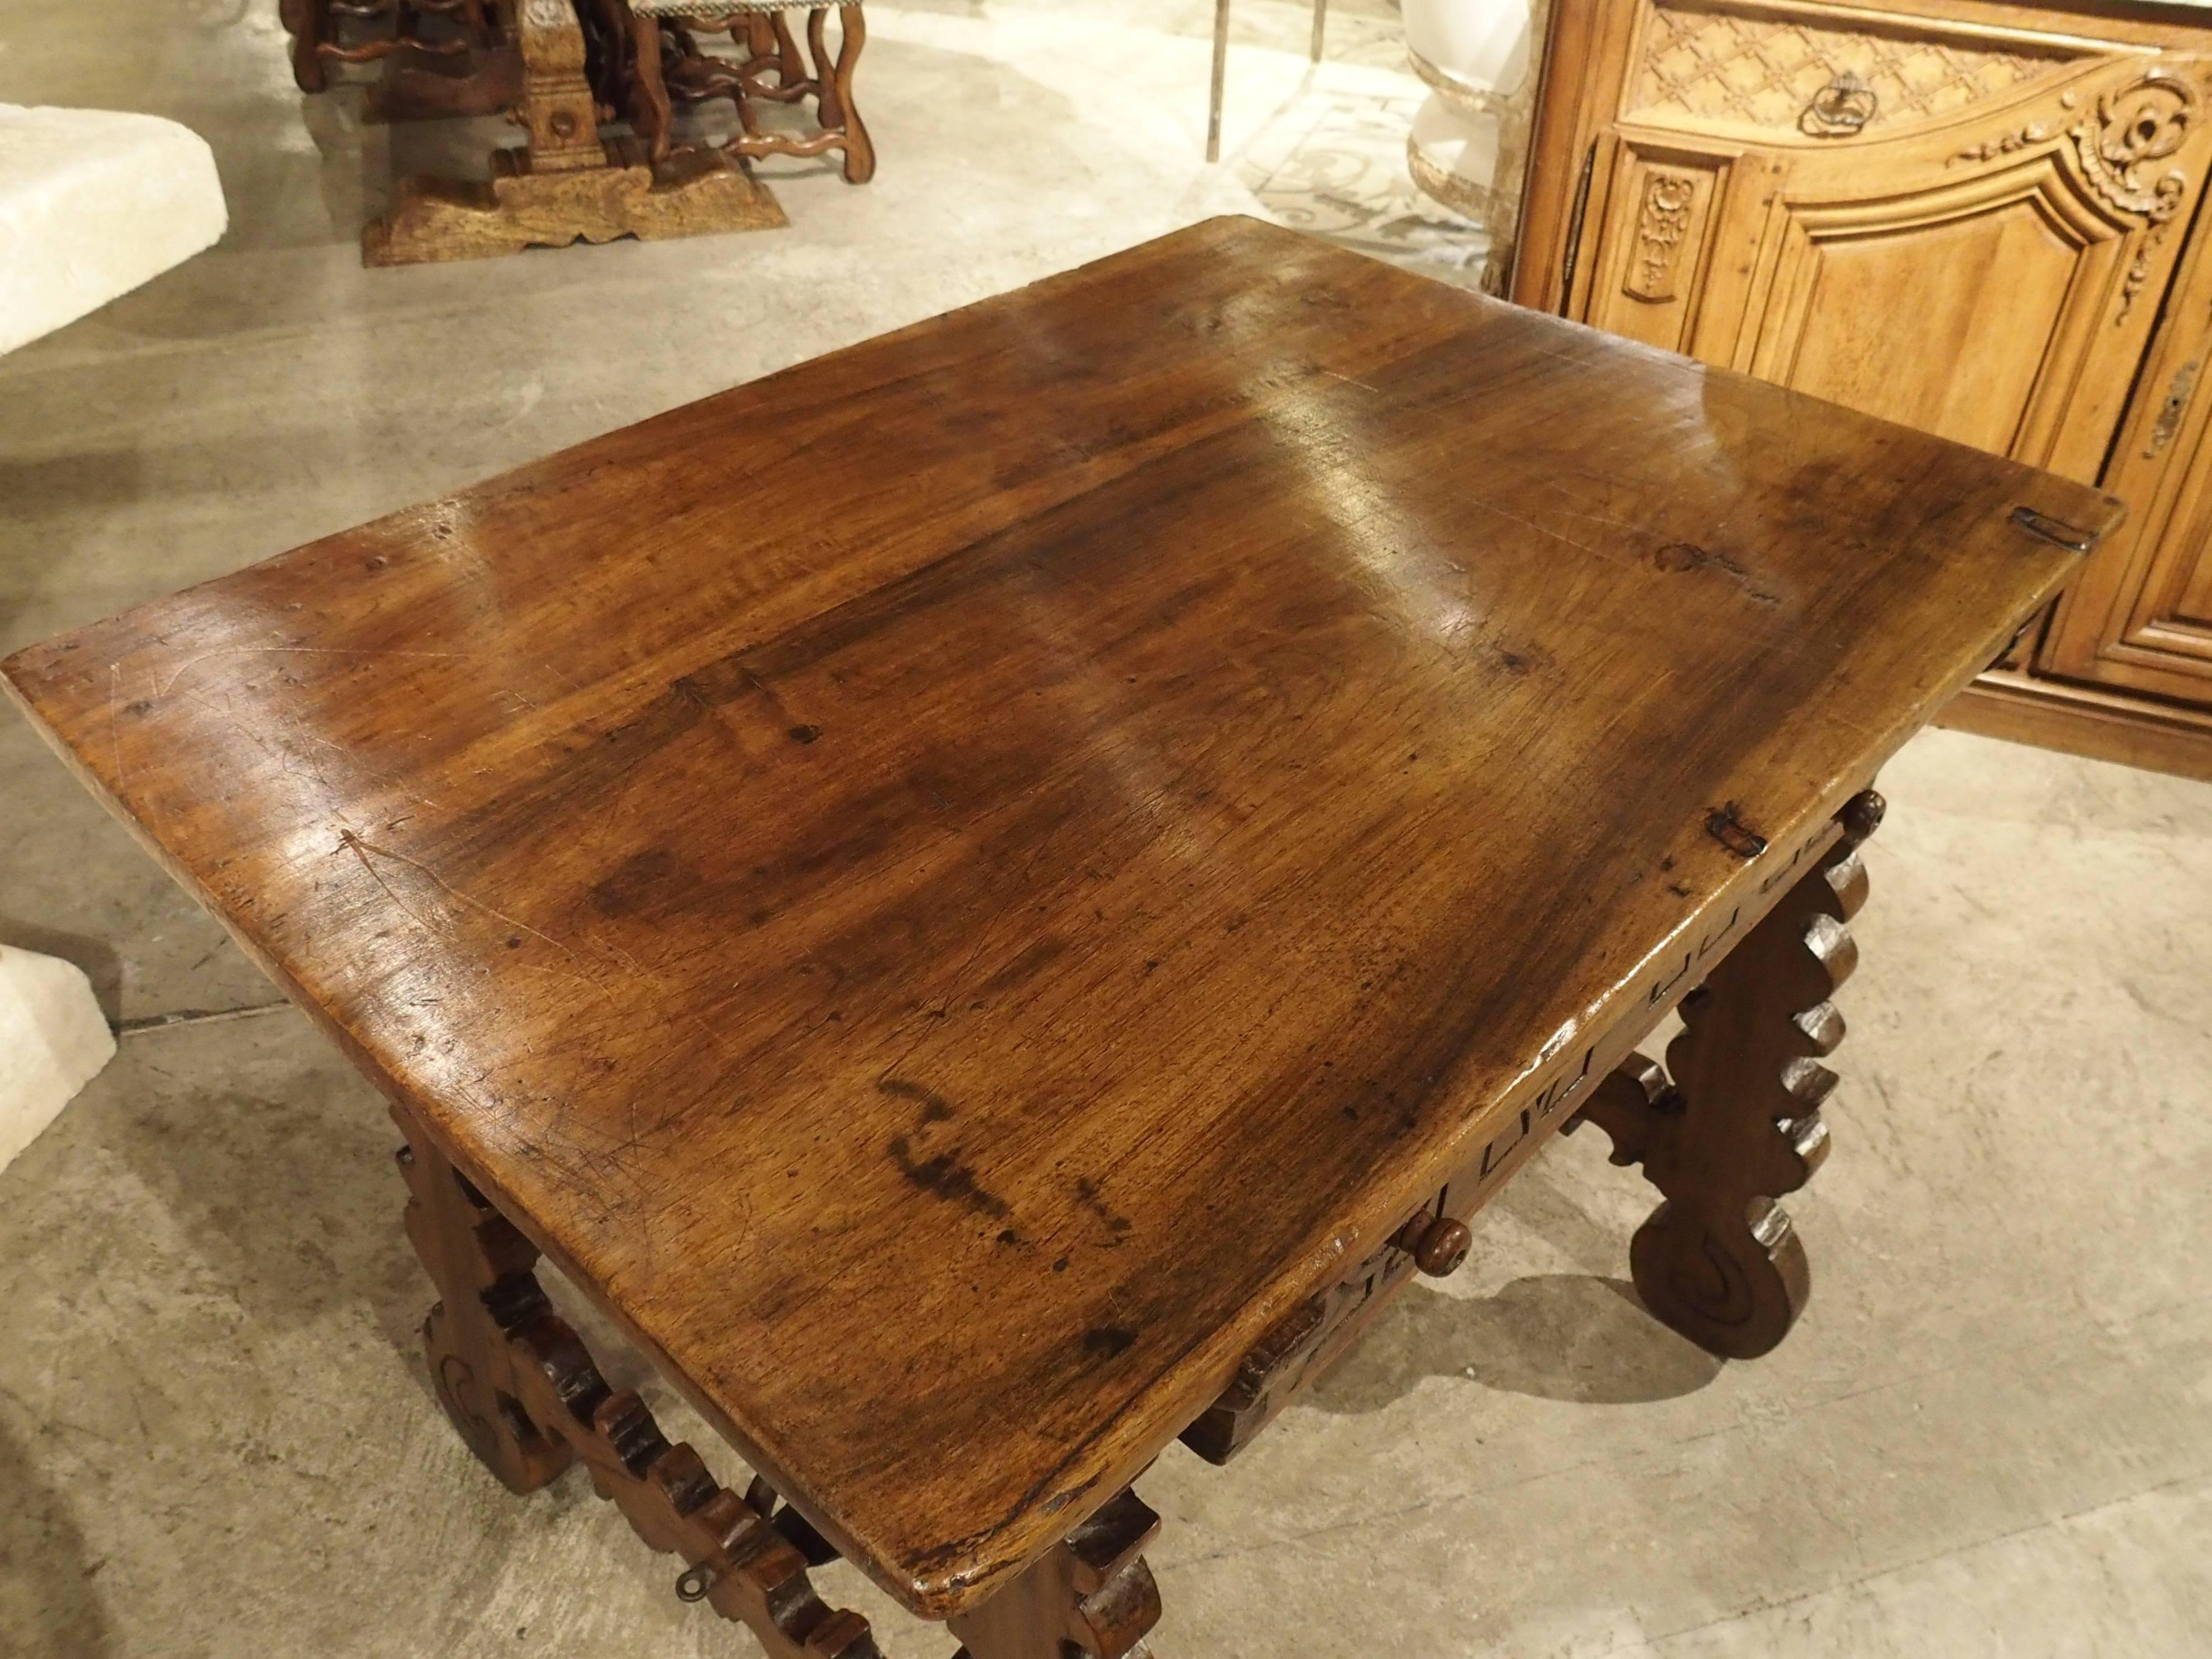 Spanish 17th Century Walnut Wood Table from Northern Spain